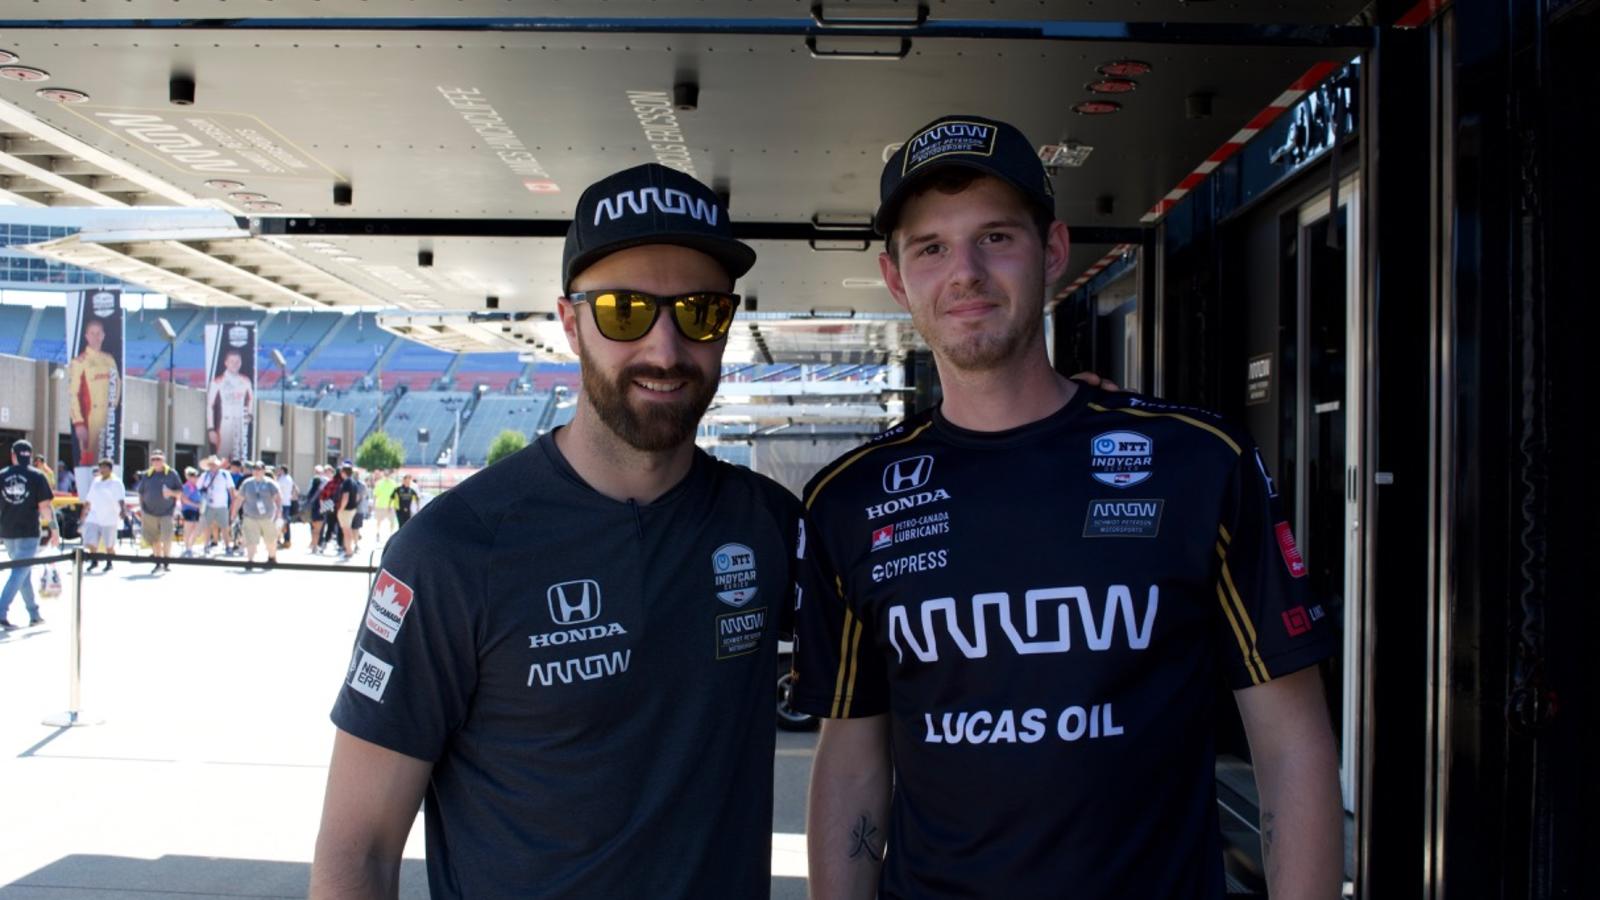 Evan Roberts of the Lincoln Tech Grand Prairie Campus with team driver James Hinchcliffe